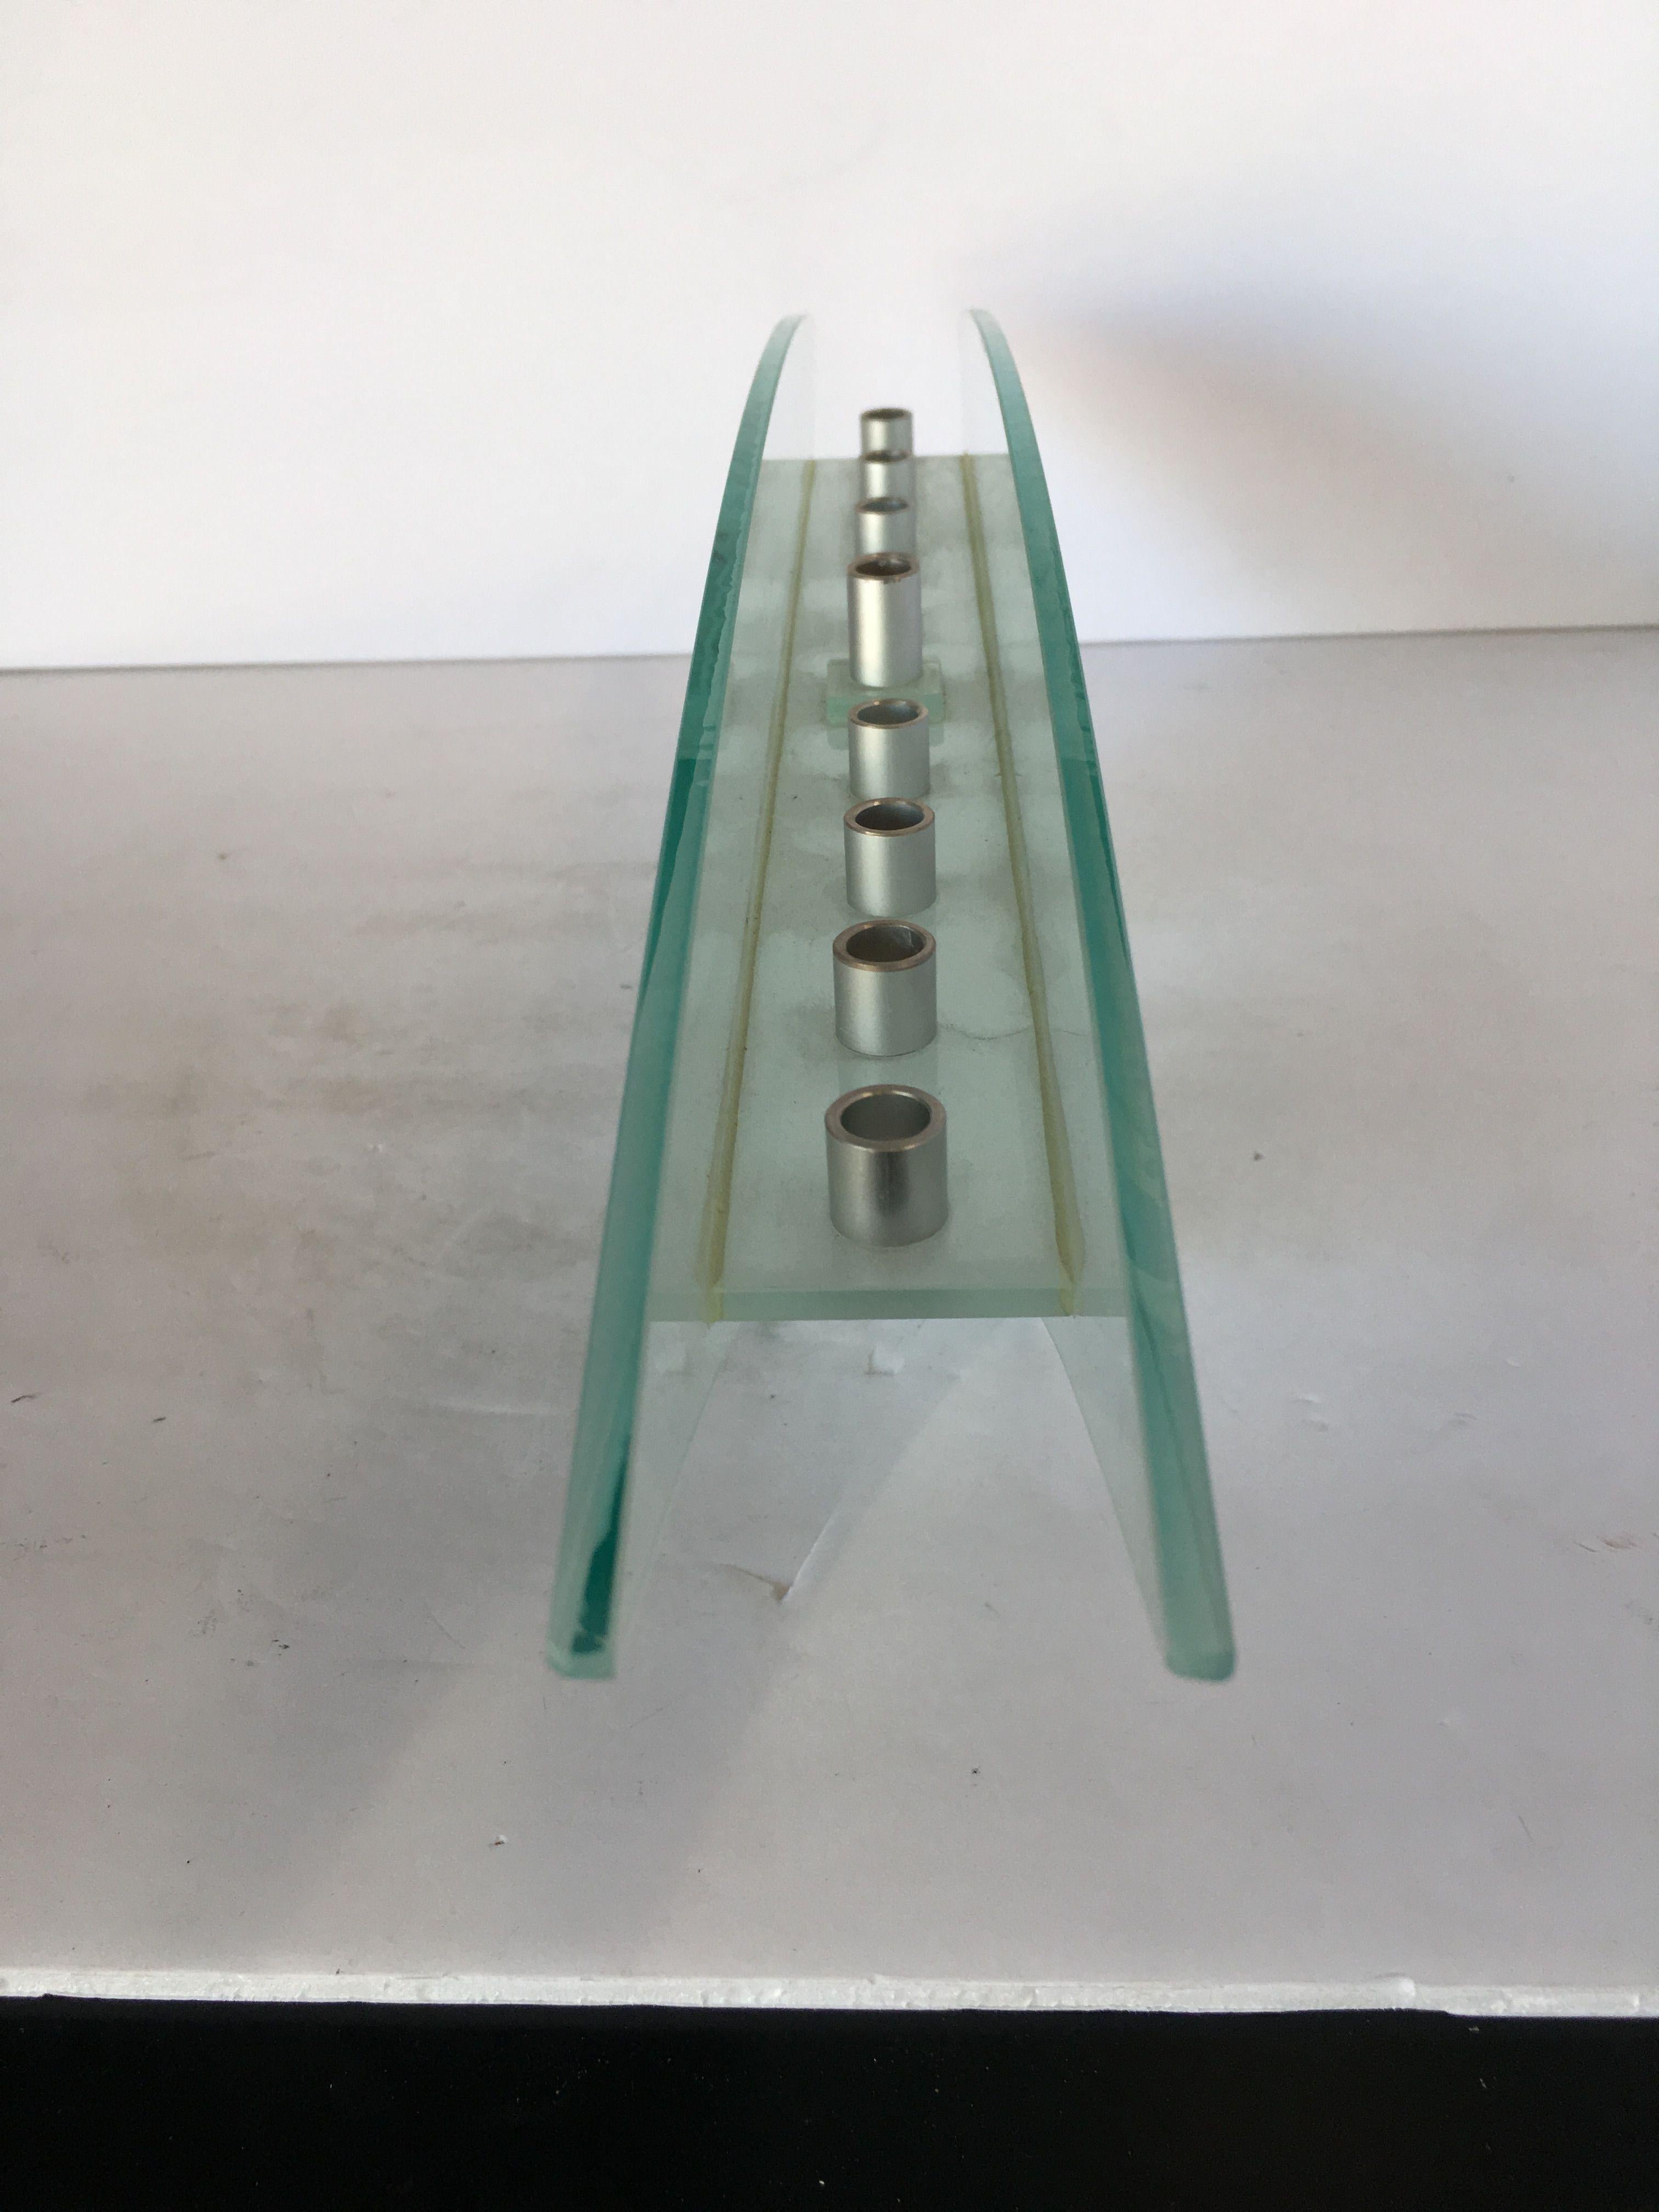 Frosted Art Glass Mantelpiece Candelabra In Excellent Condition For Sale In Van Nuys, CA